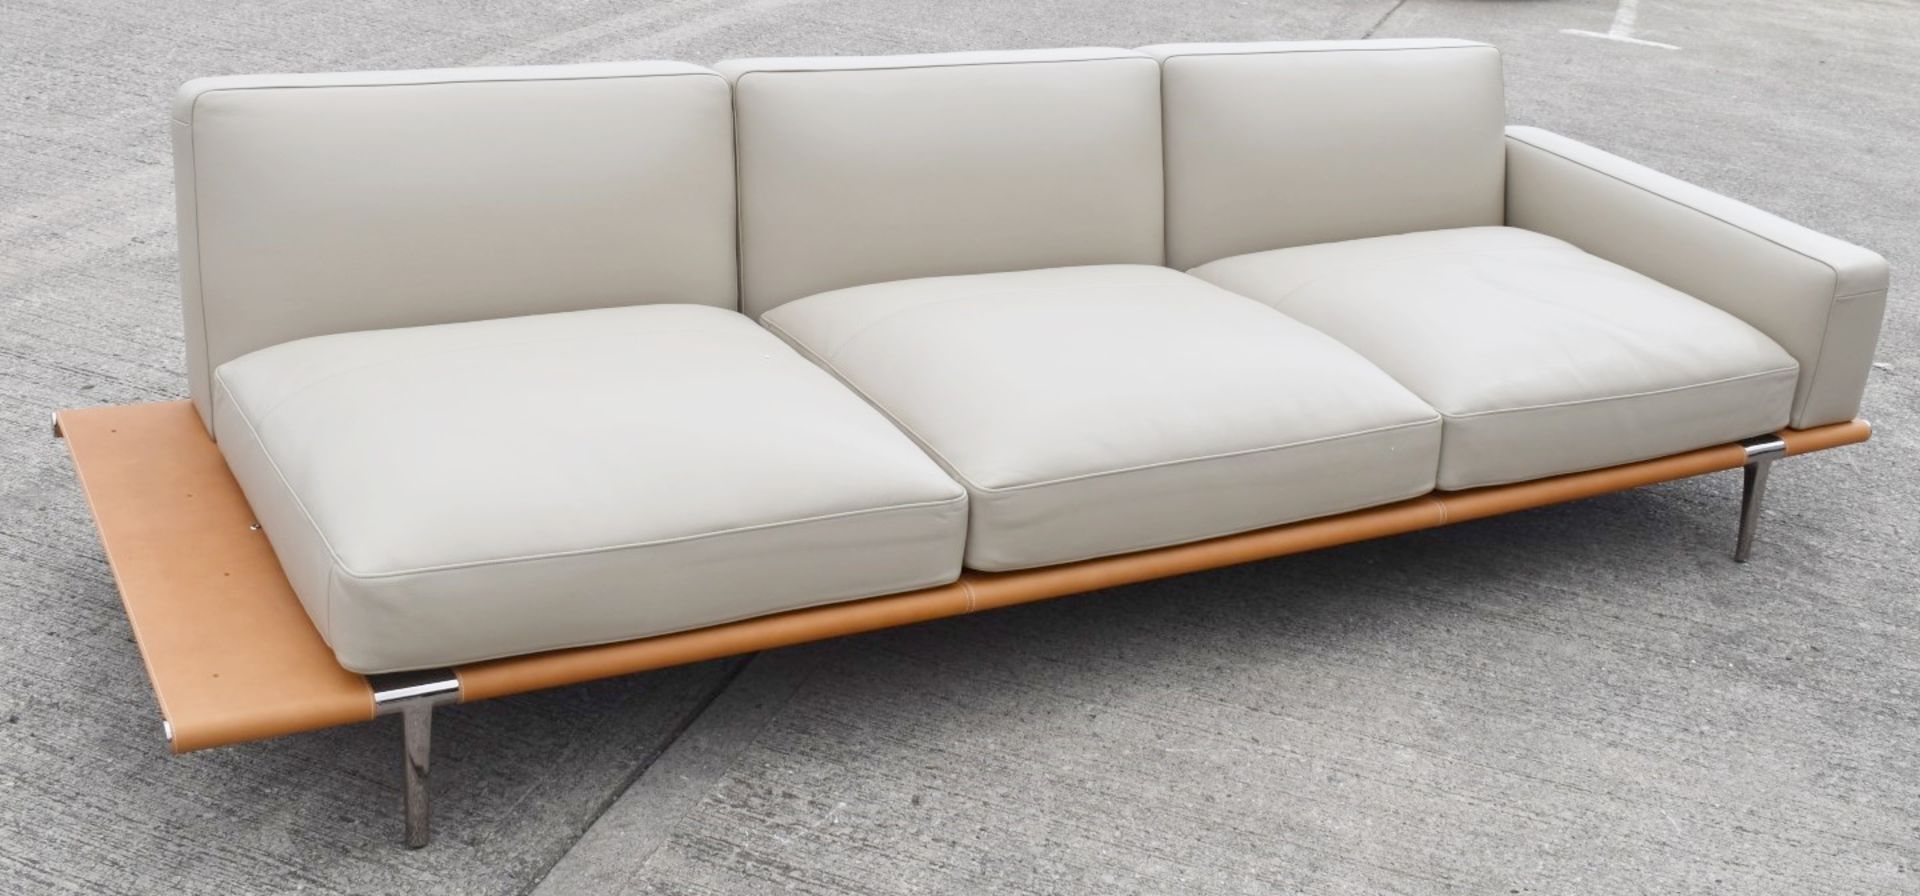 1 x POLTRONA FRAU Let It Be Designer Leather Modular 3-Seater Sofa with Storage End - RRP £14,000 - Image 4 of 21